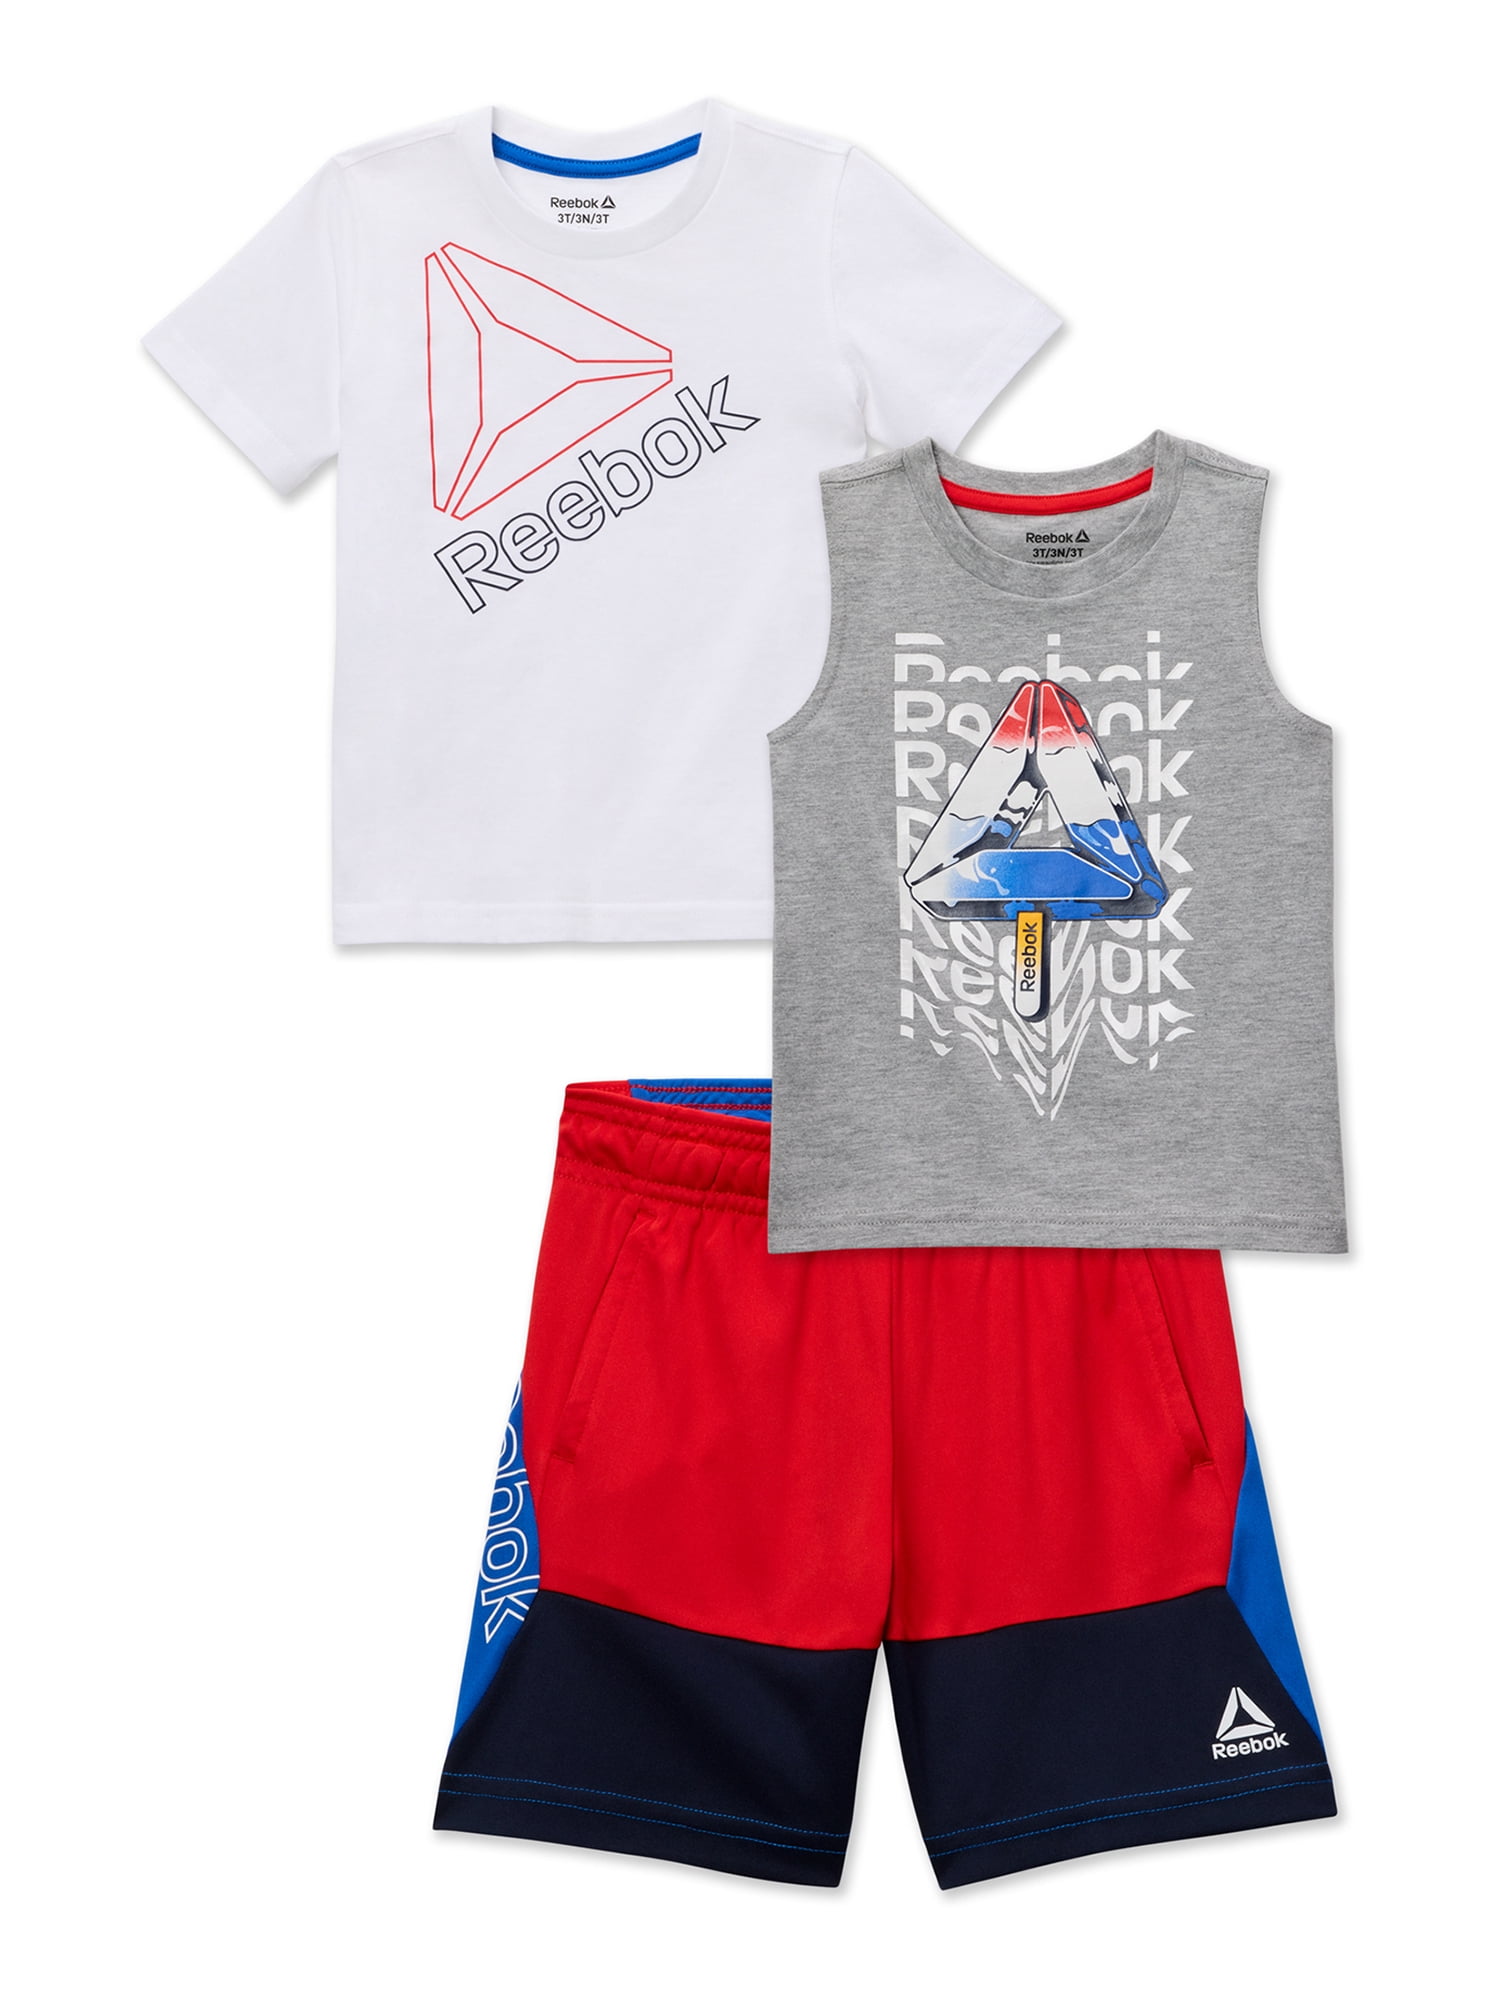 Muf Cilia kleermaker Reebok Baby and Toddler Boy T-Shirt, Muscle Tank, and Shorts Outfit Set,  3-Piece, Sizes 12M-5T - Walmart.com